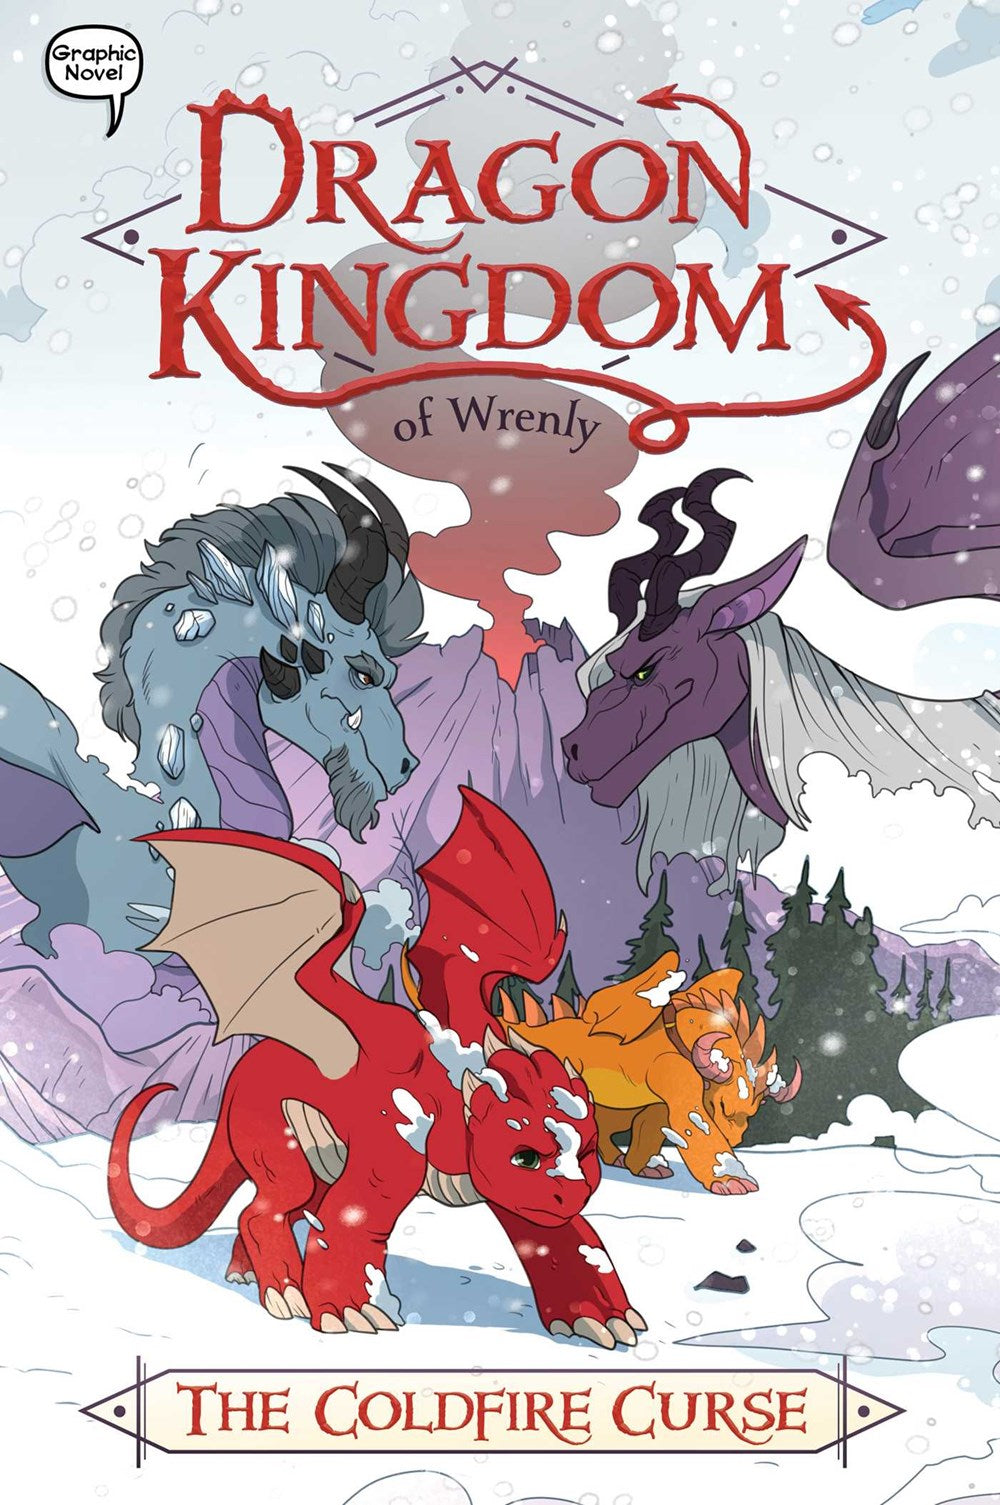 Dragon Kingdom of Wrenly #1: The Coldfire Curse